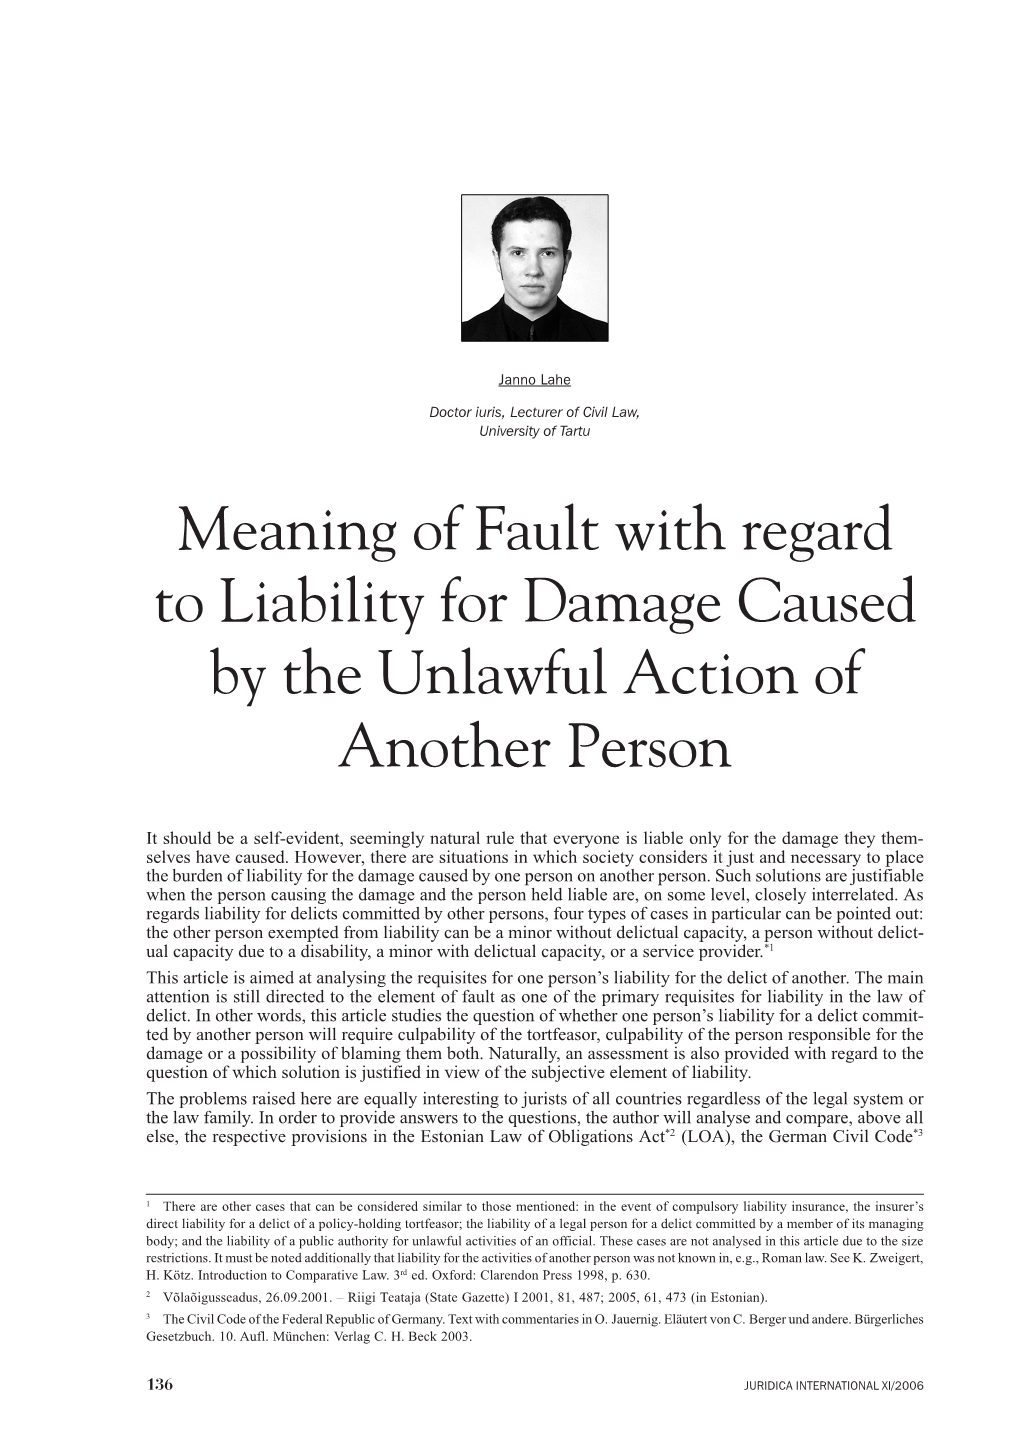 Meaning of Fault with Regard to Liability for Damage Caused by the Unlawful Action of Another Person